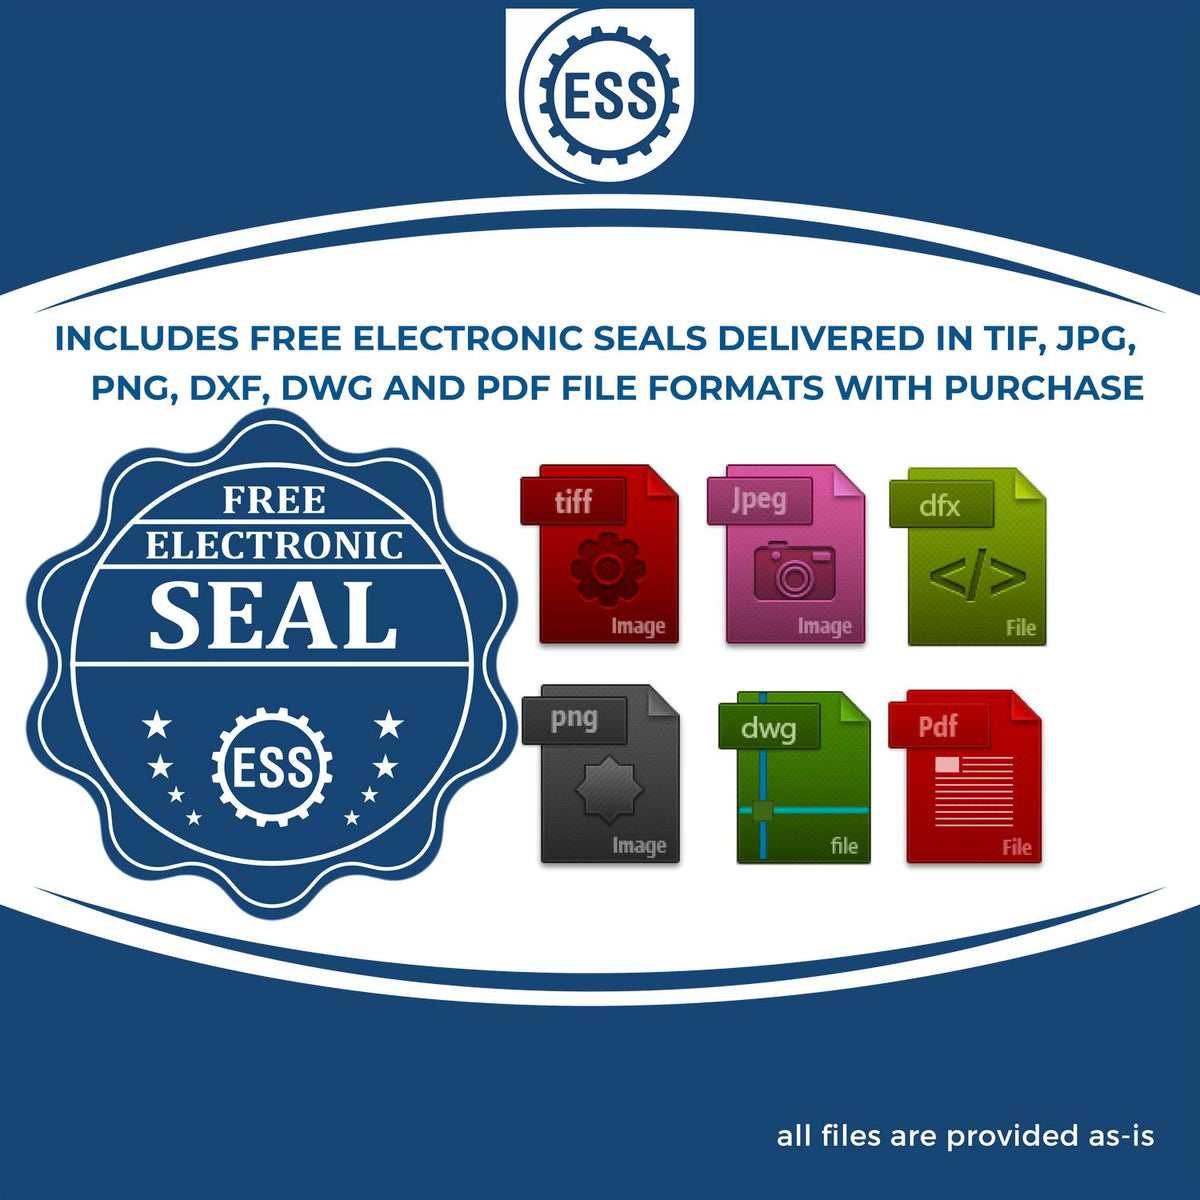 An infographic for the free electronic seal for the Self-Inking California PE Stamp illustrating the different file type icons such as DXF, DWG, TIF, JPG and PNG.